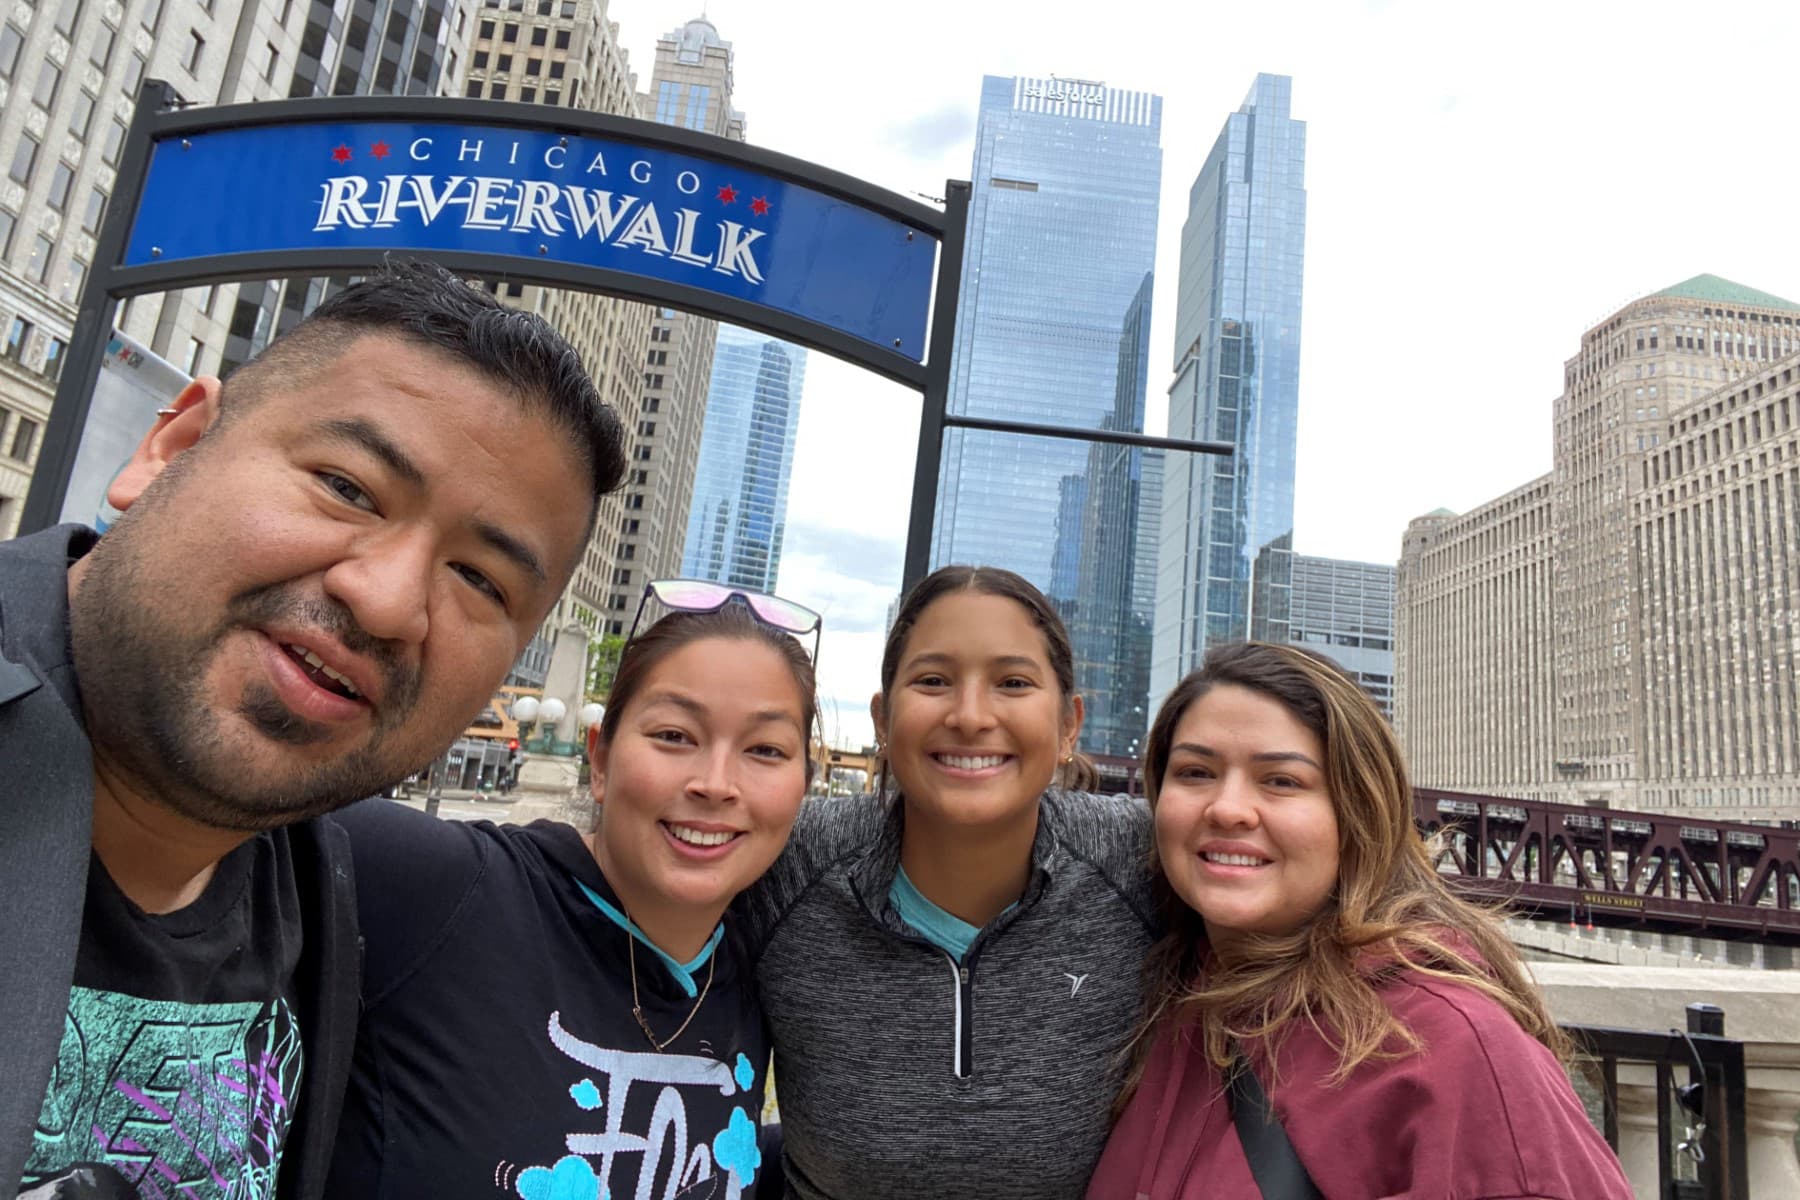 walking mentoring meeting while in Chicago for AERA